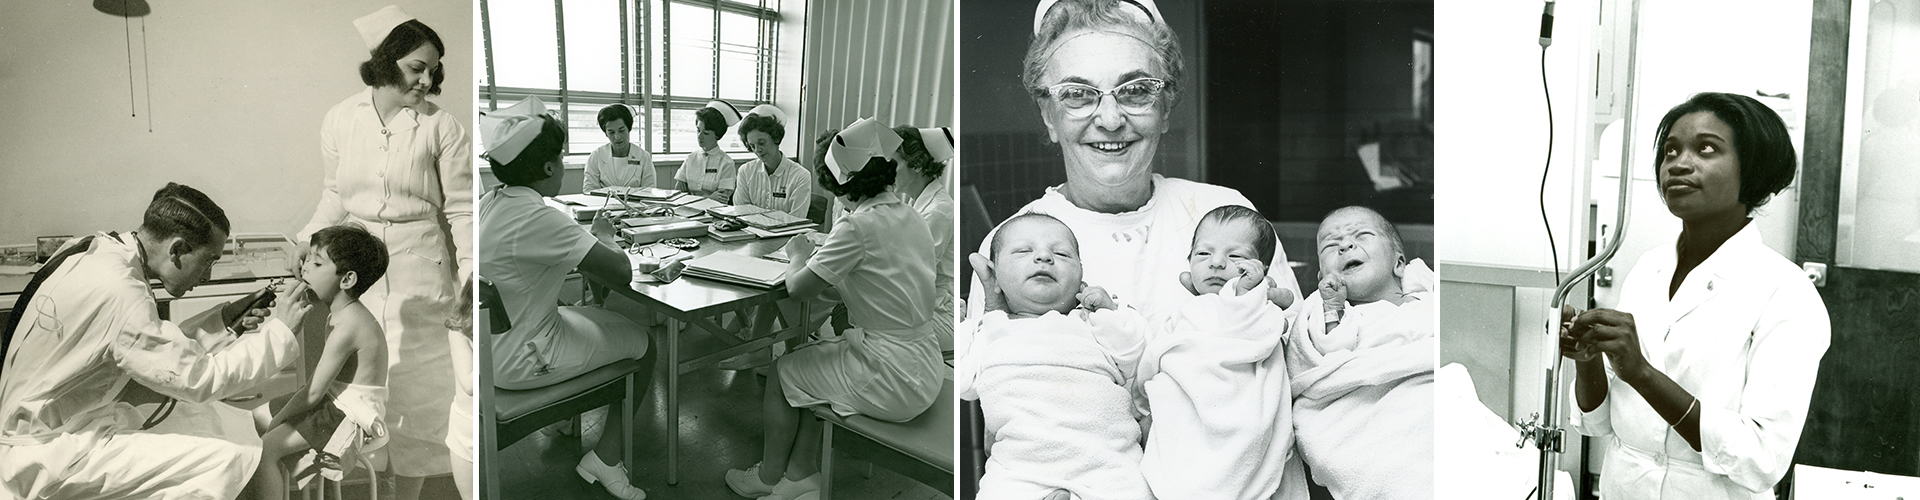 Historic images of nurses and patients at Sinai Hospital and the North End Clinic from 1926 - 1966